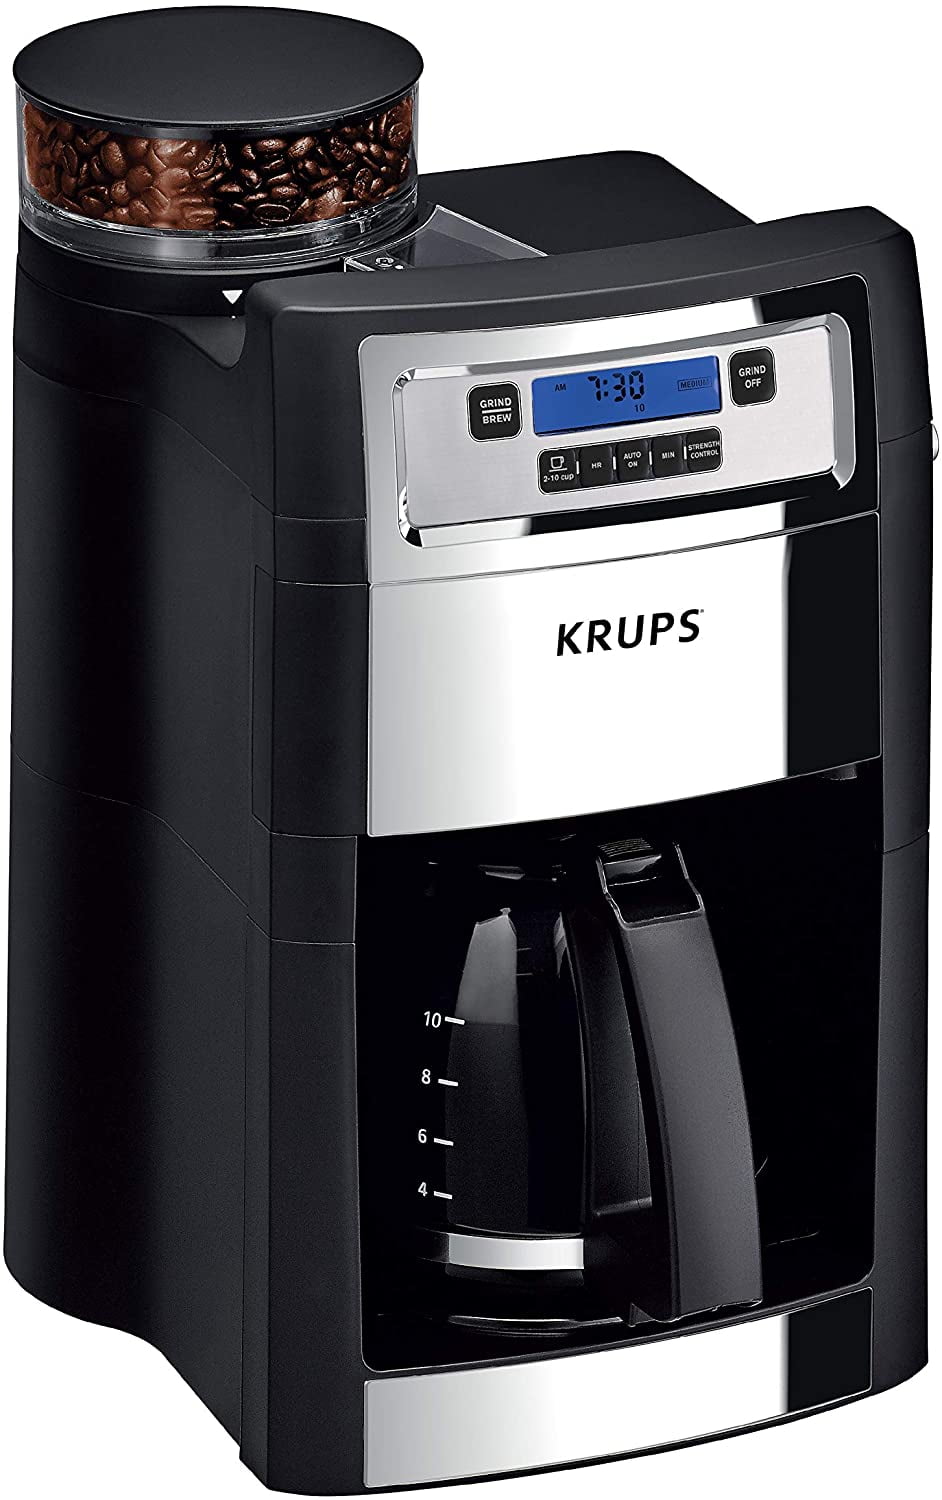 KRUPS Grind and Brew Auto-Start Maker with Builtin Burr Coffee